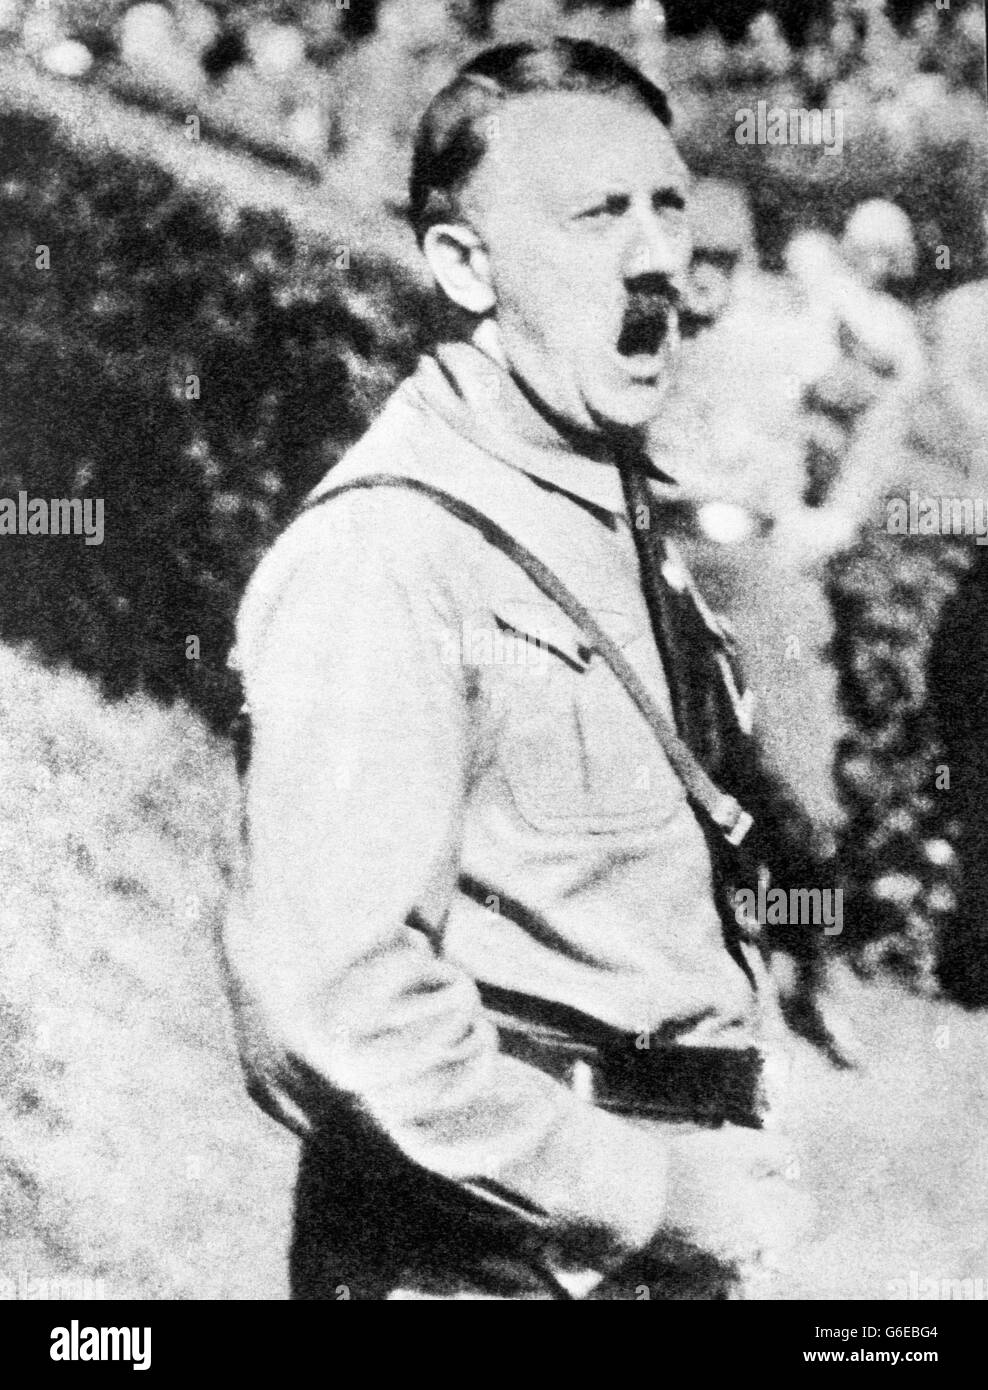 World War Two, Adolf Hitler. Adolf Hitler speaking at a rally. Date unknown. Stock Photo